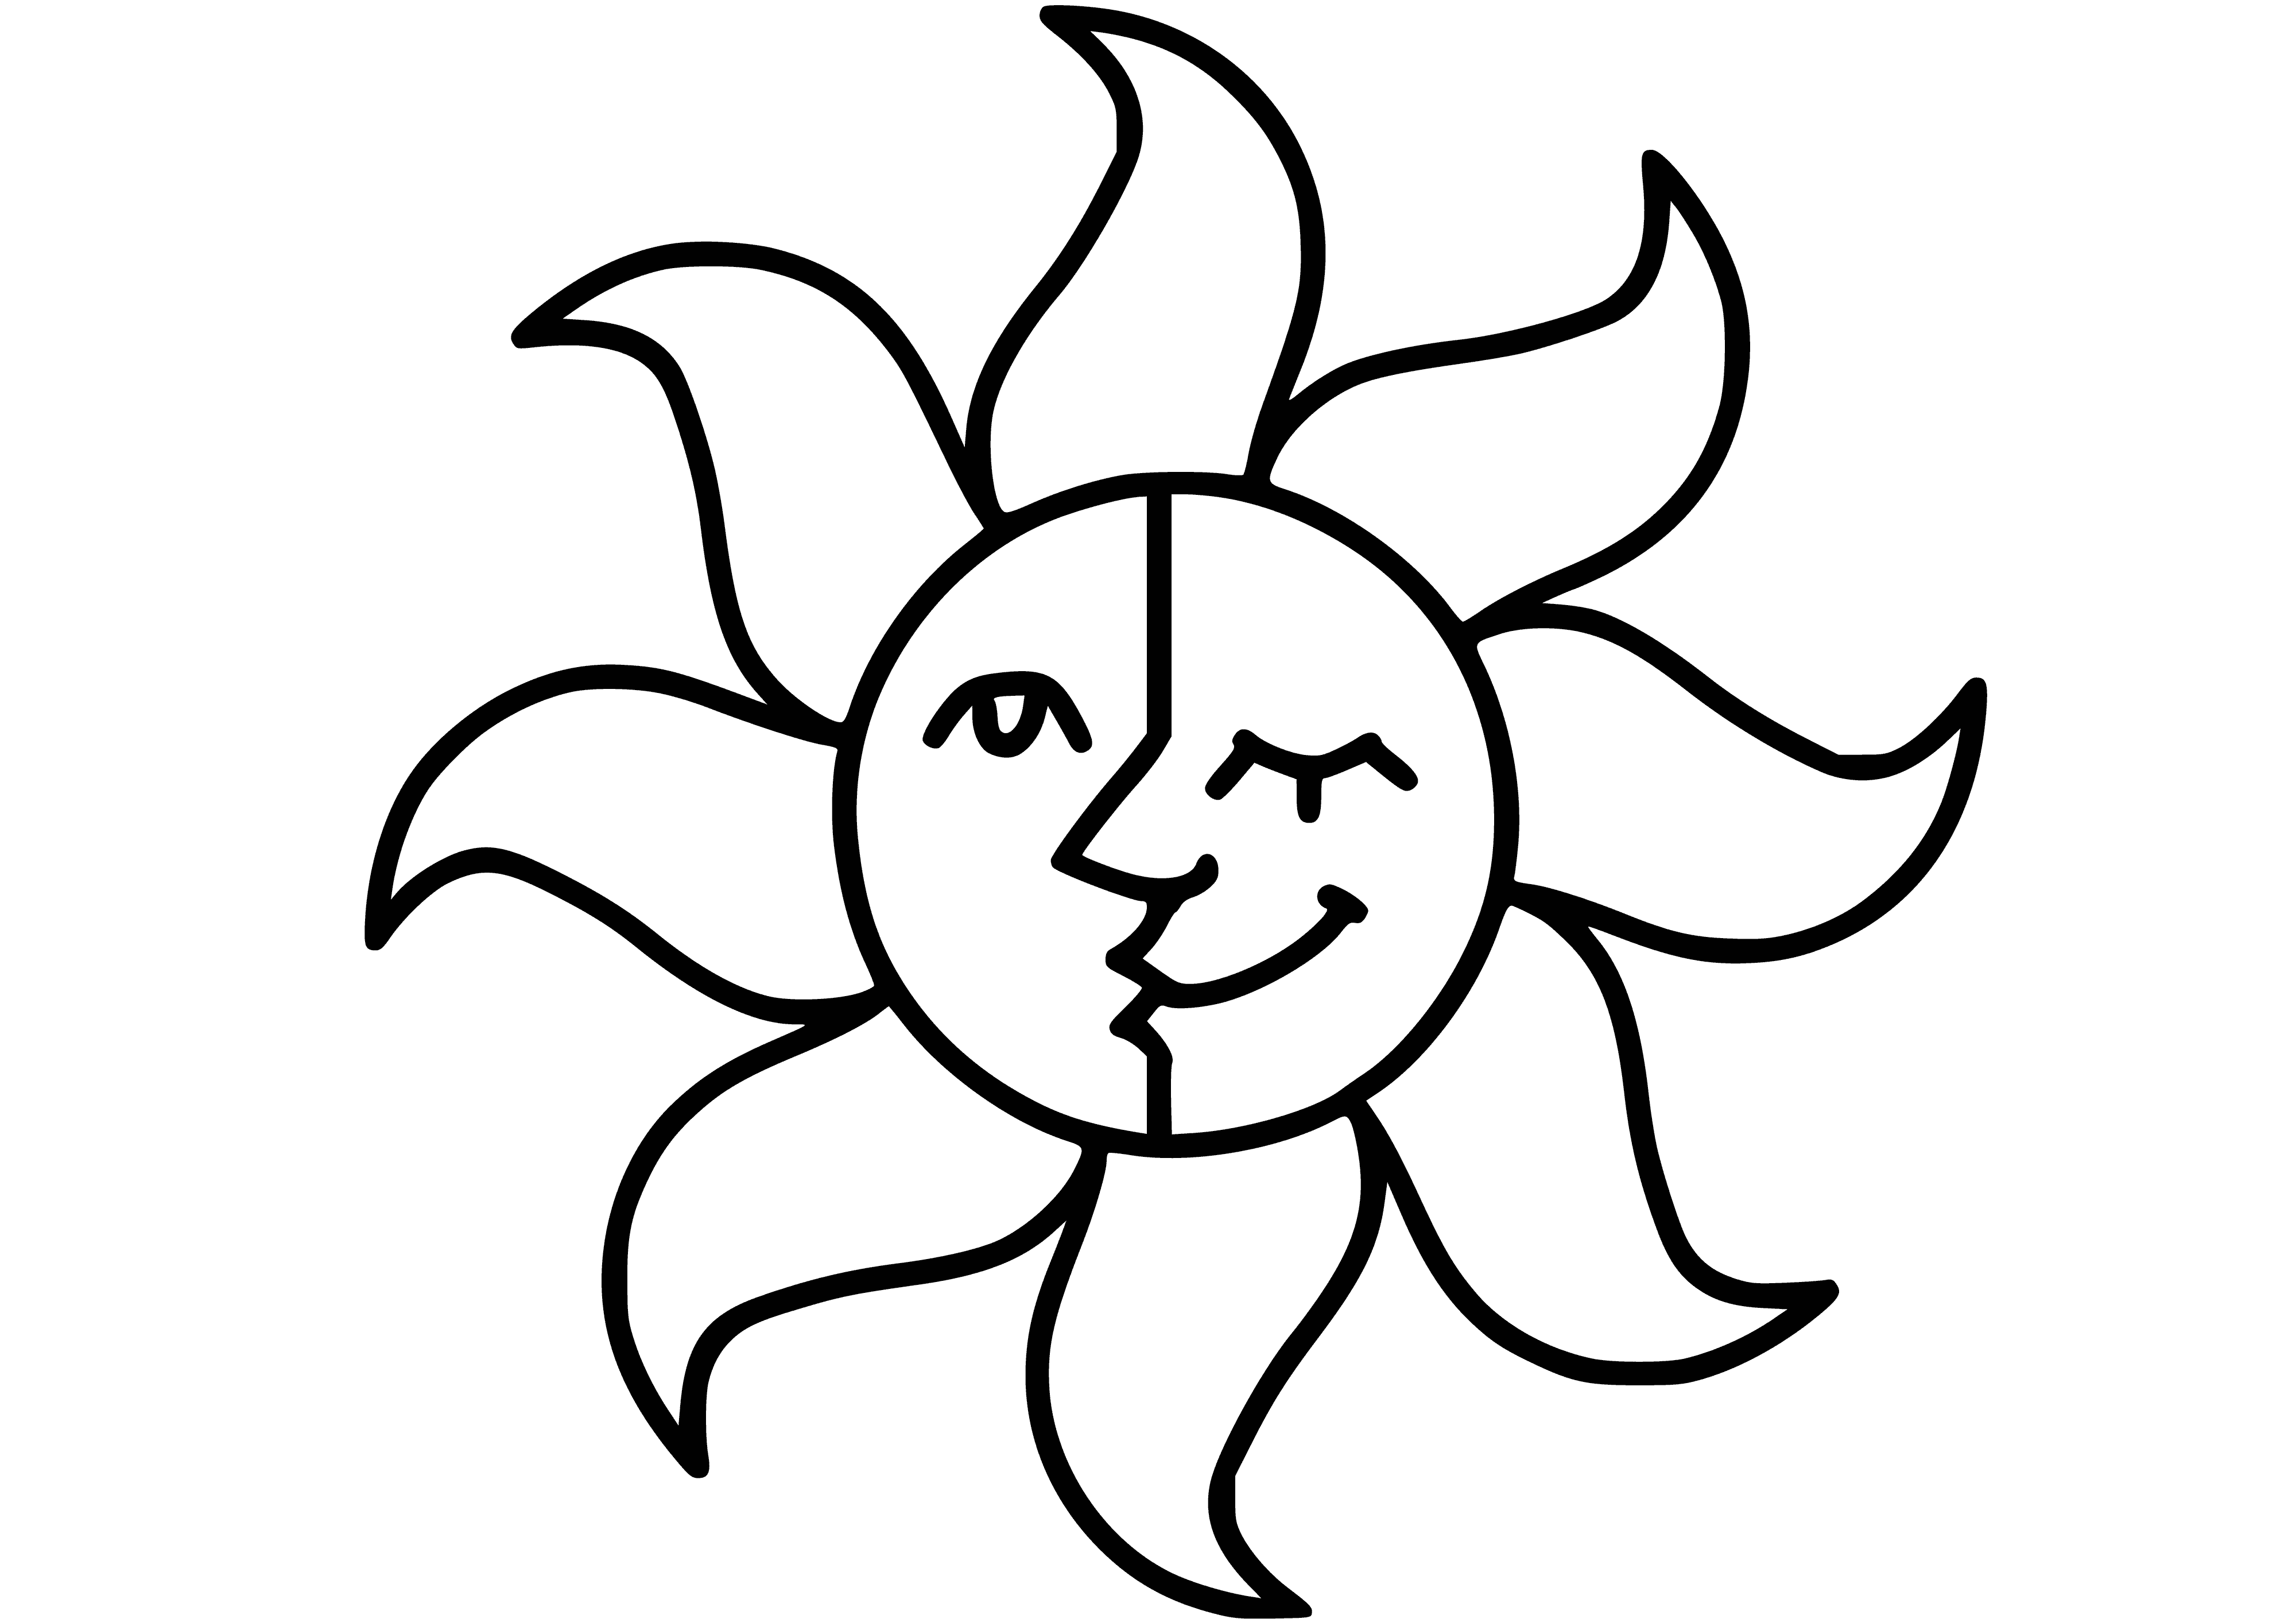 coloring page: The sun is a big orange circle with a smiling yellow face, surrounded by orange & yellow rays. #SolarSystem